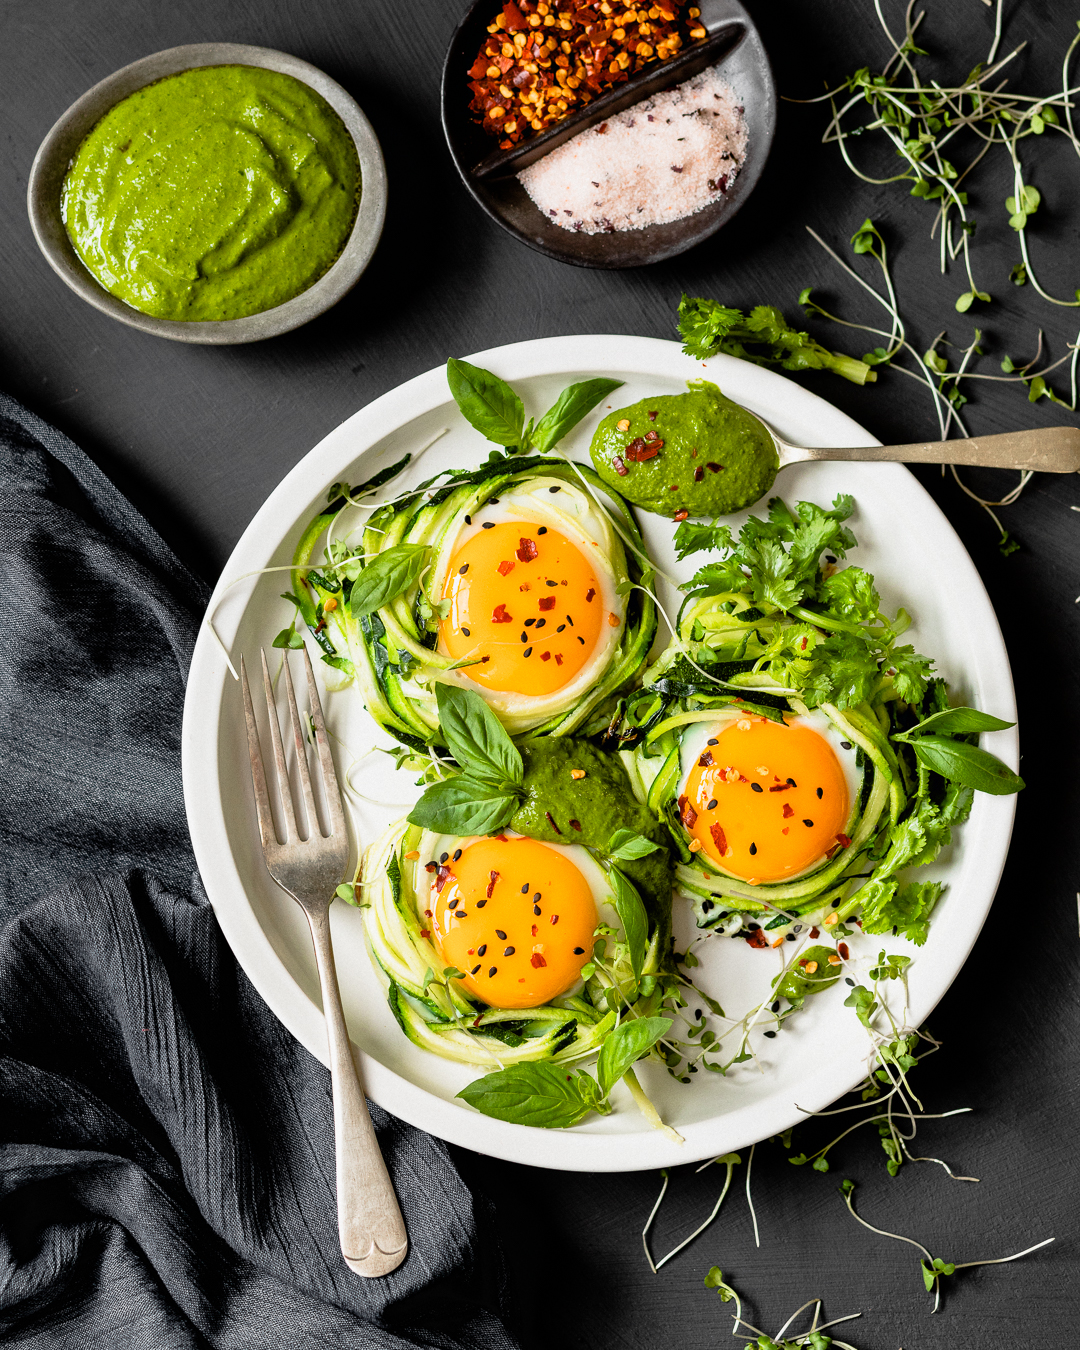 Zucchini_egg_nests_with_Chimichuri_by_Jordan_Pie_Nutritionist_Photographer-1.jpg